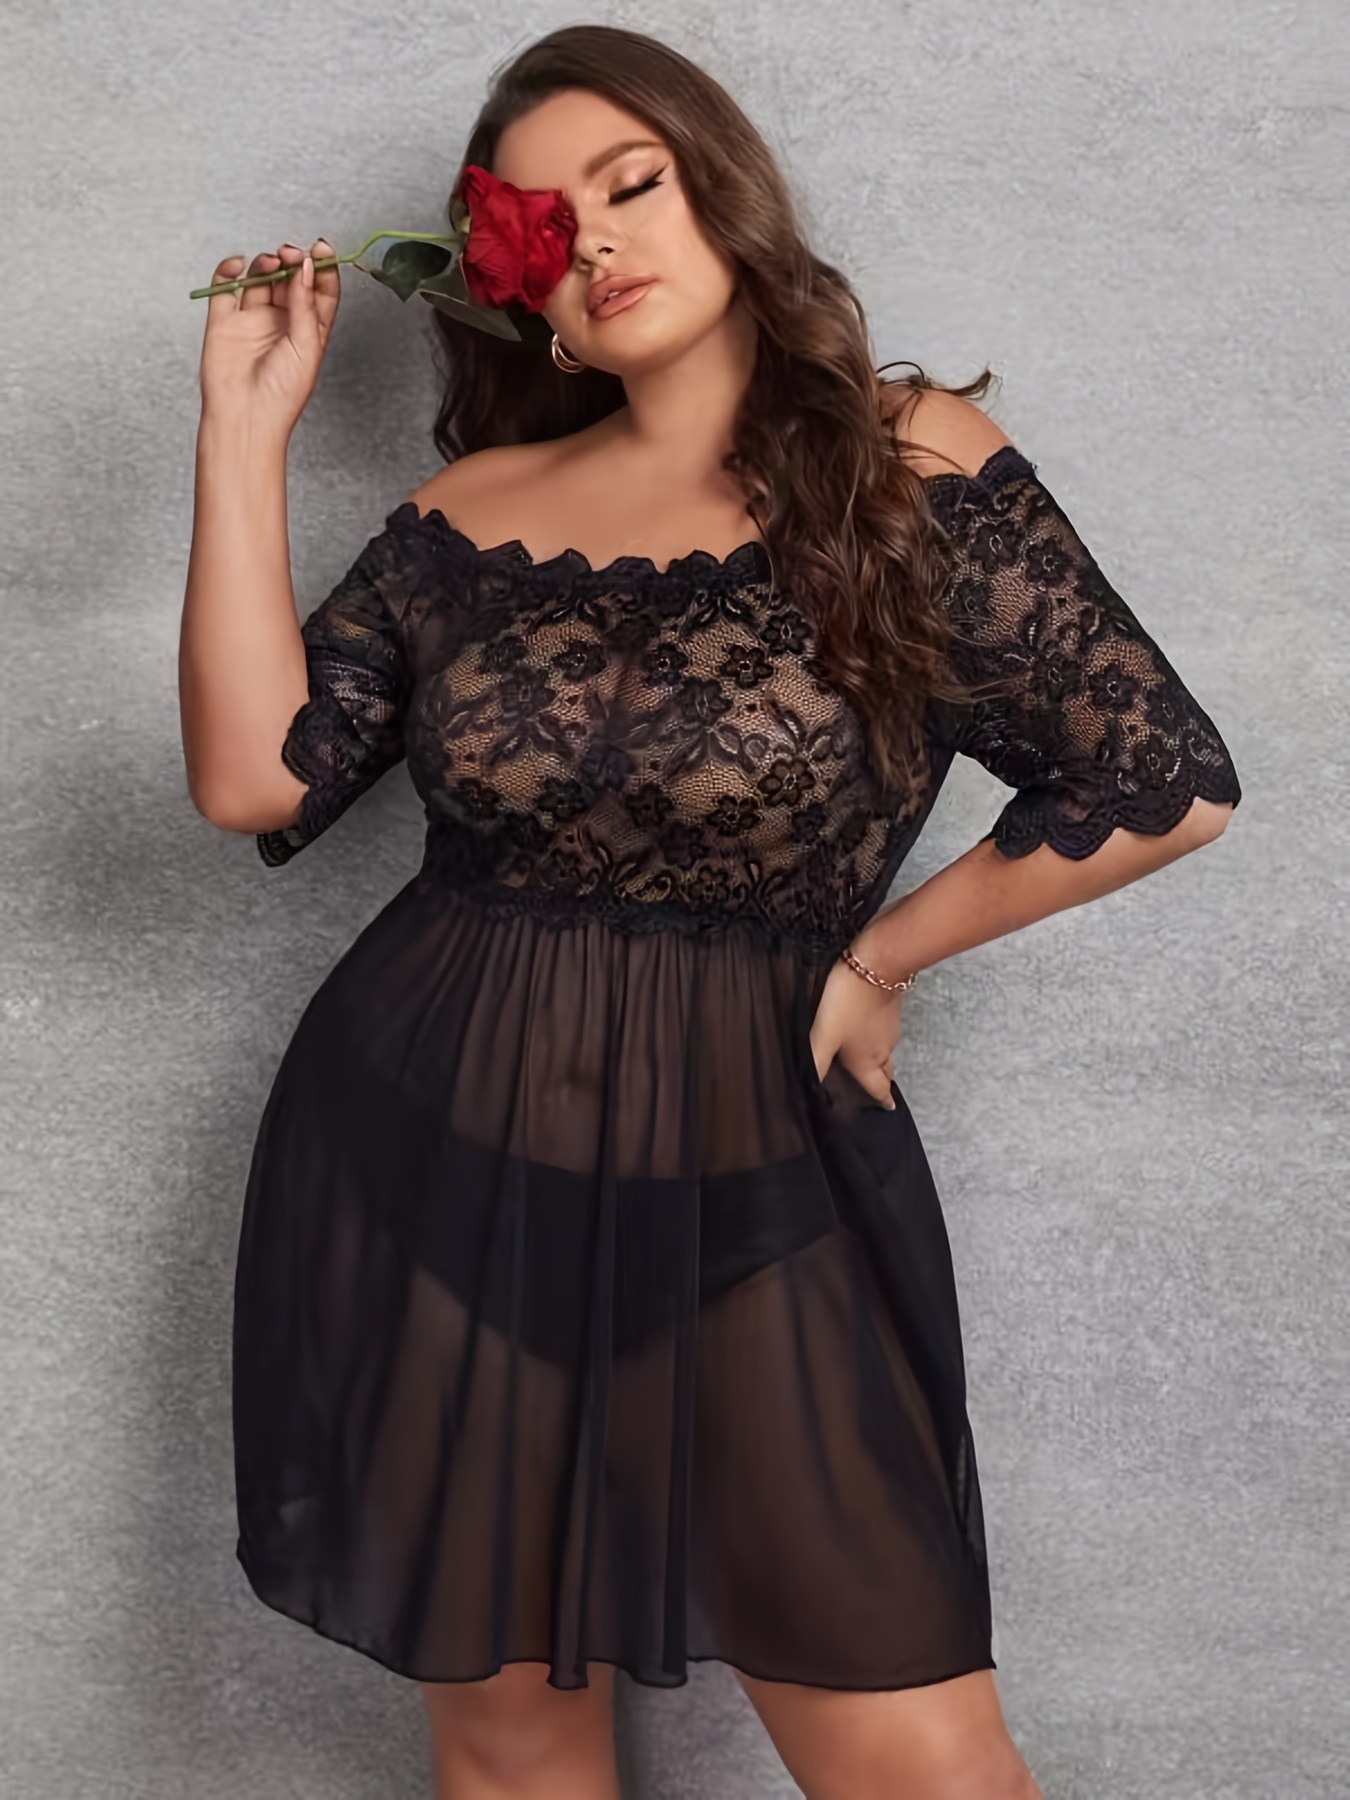  Plus Size Lingerie for Women, Sexy Off-Shoulder See